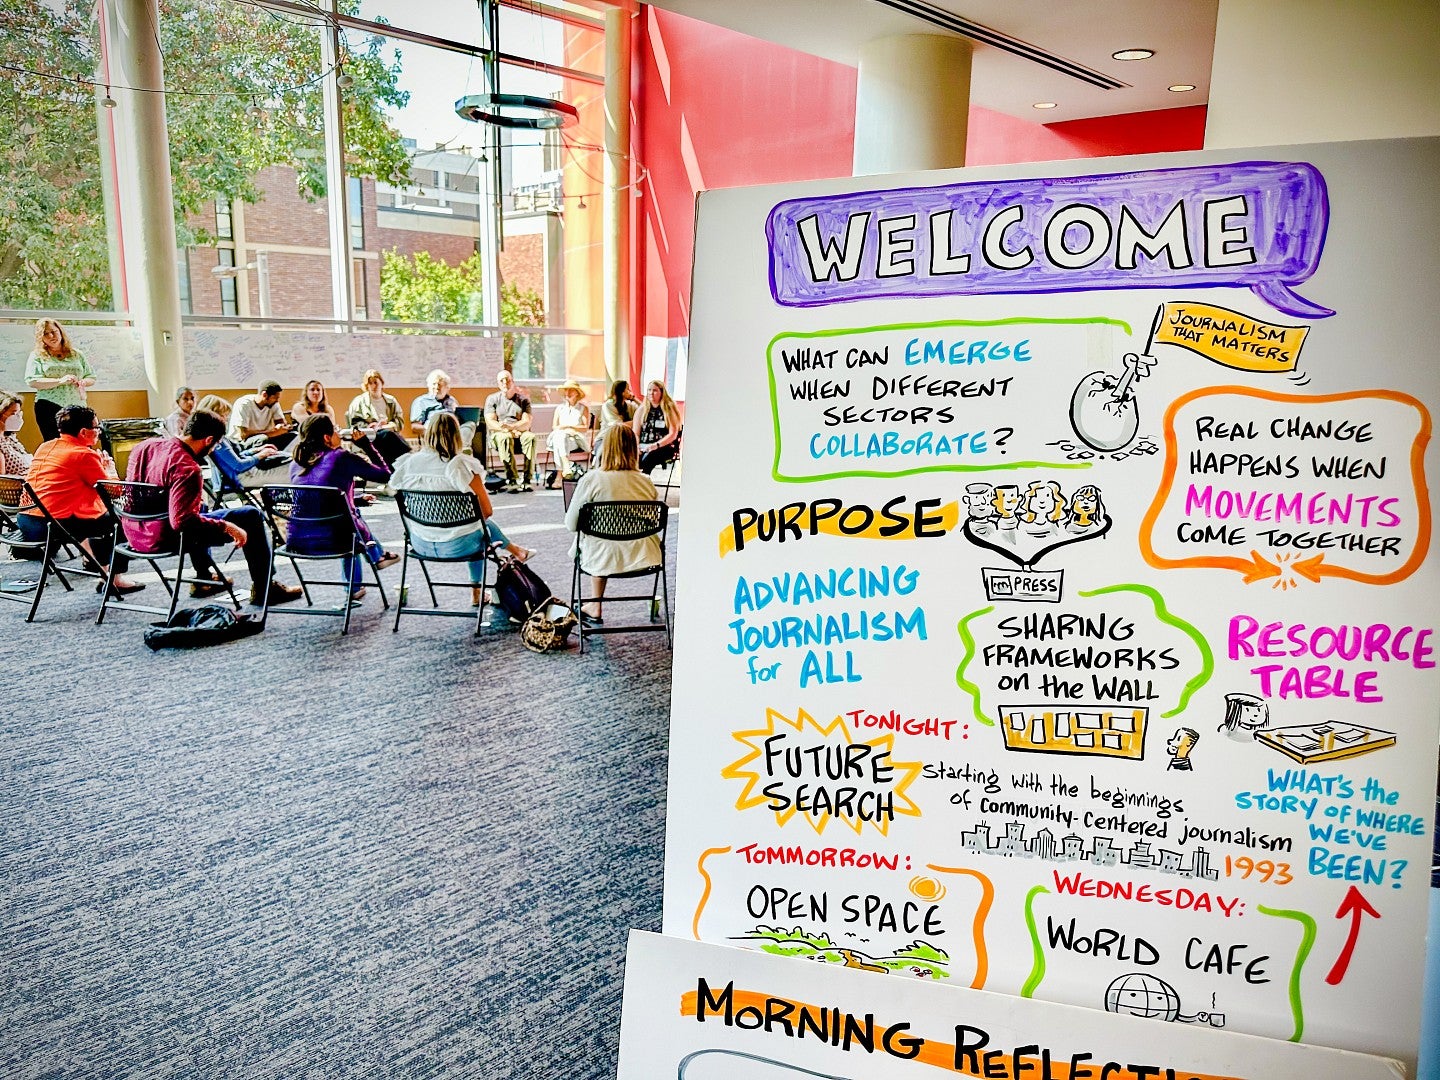 a colorful handwritten poster with notes about advancing journalism for all, with a group of people in the background